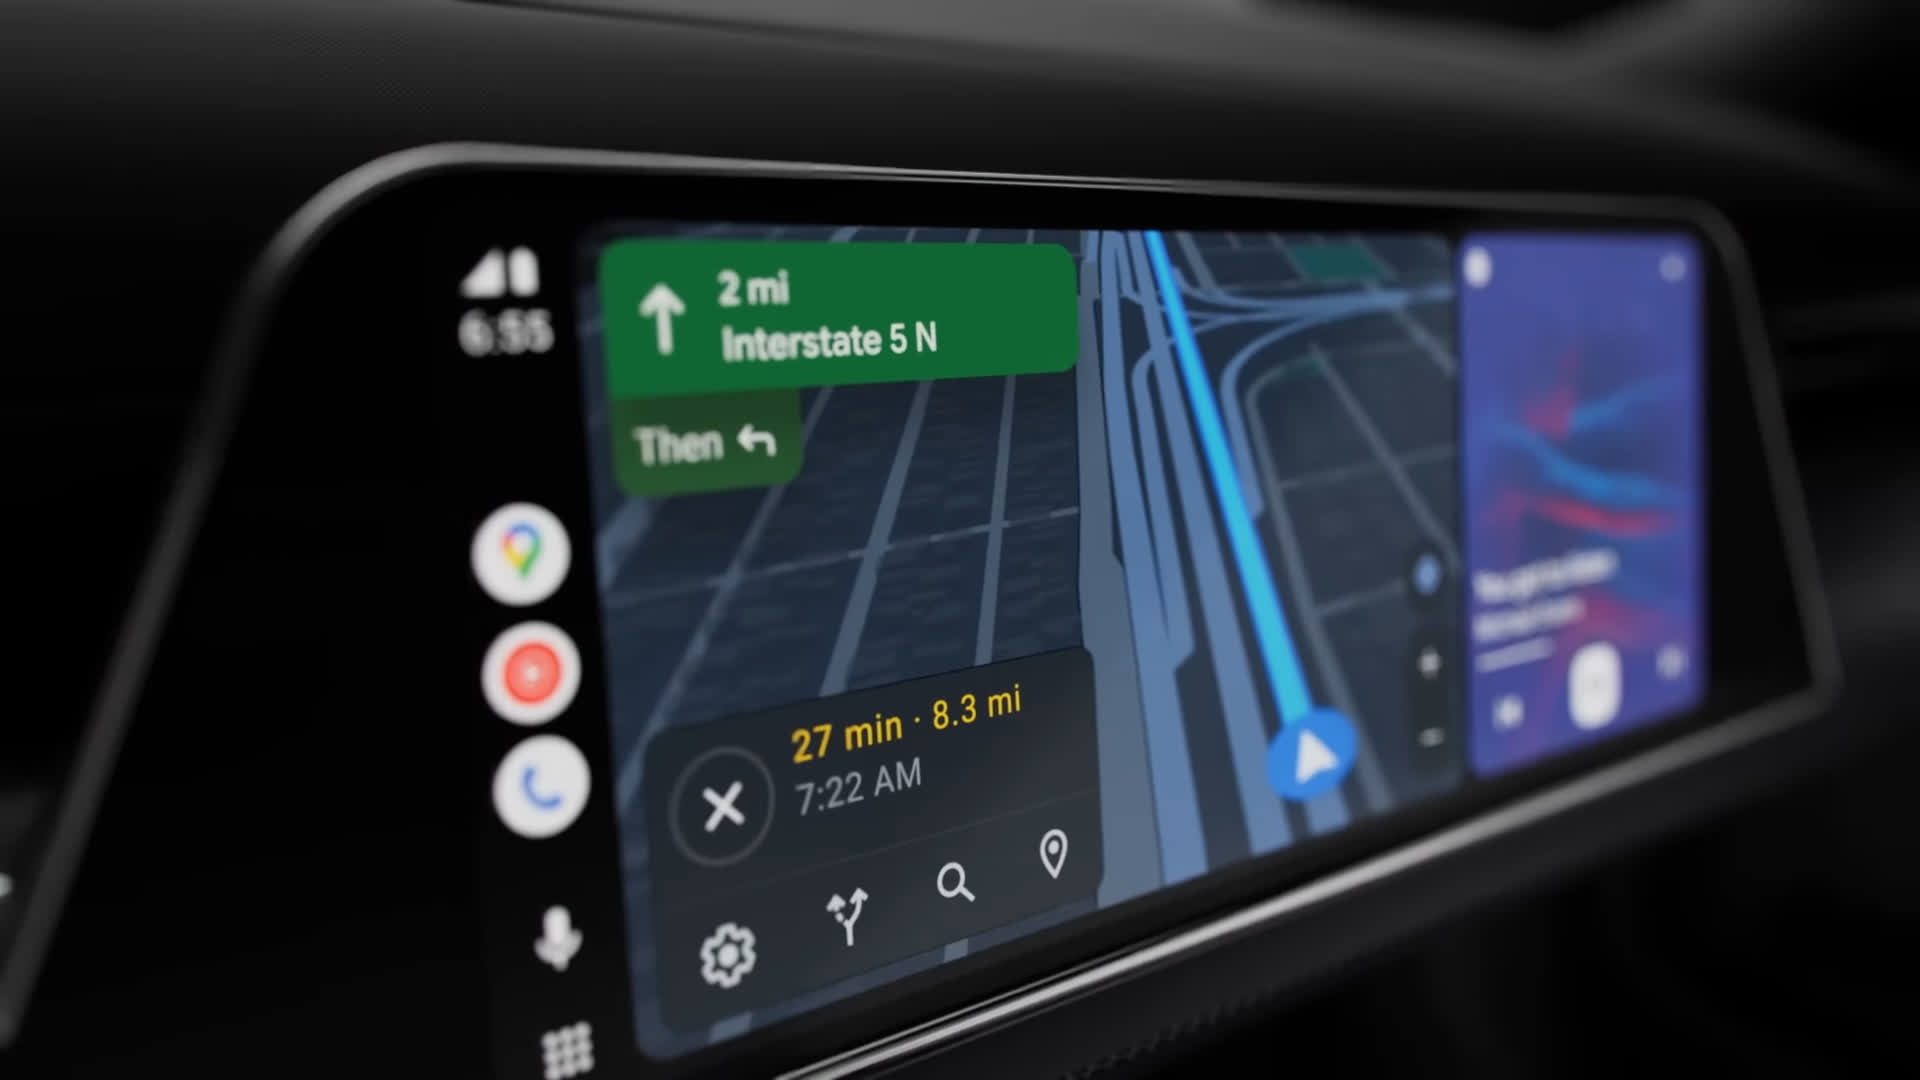 Android Auto's big overhaul is finally here with major interface improvements